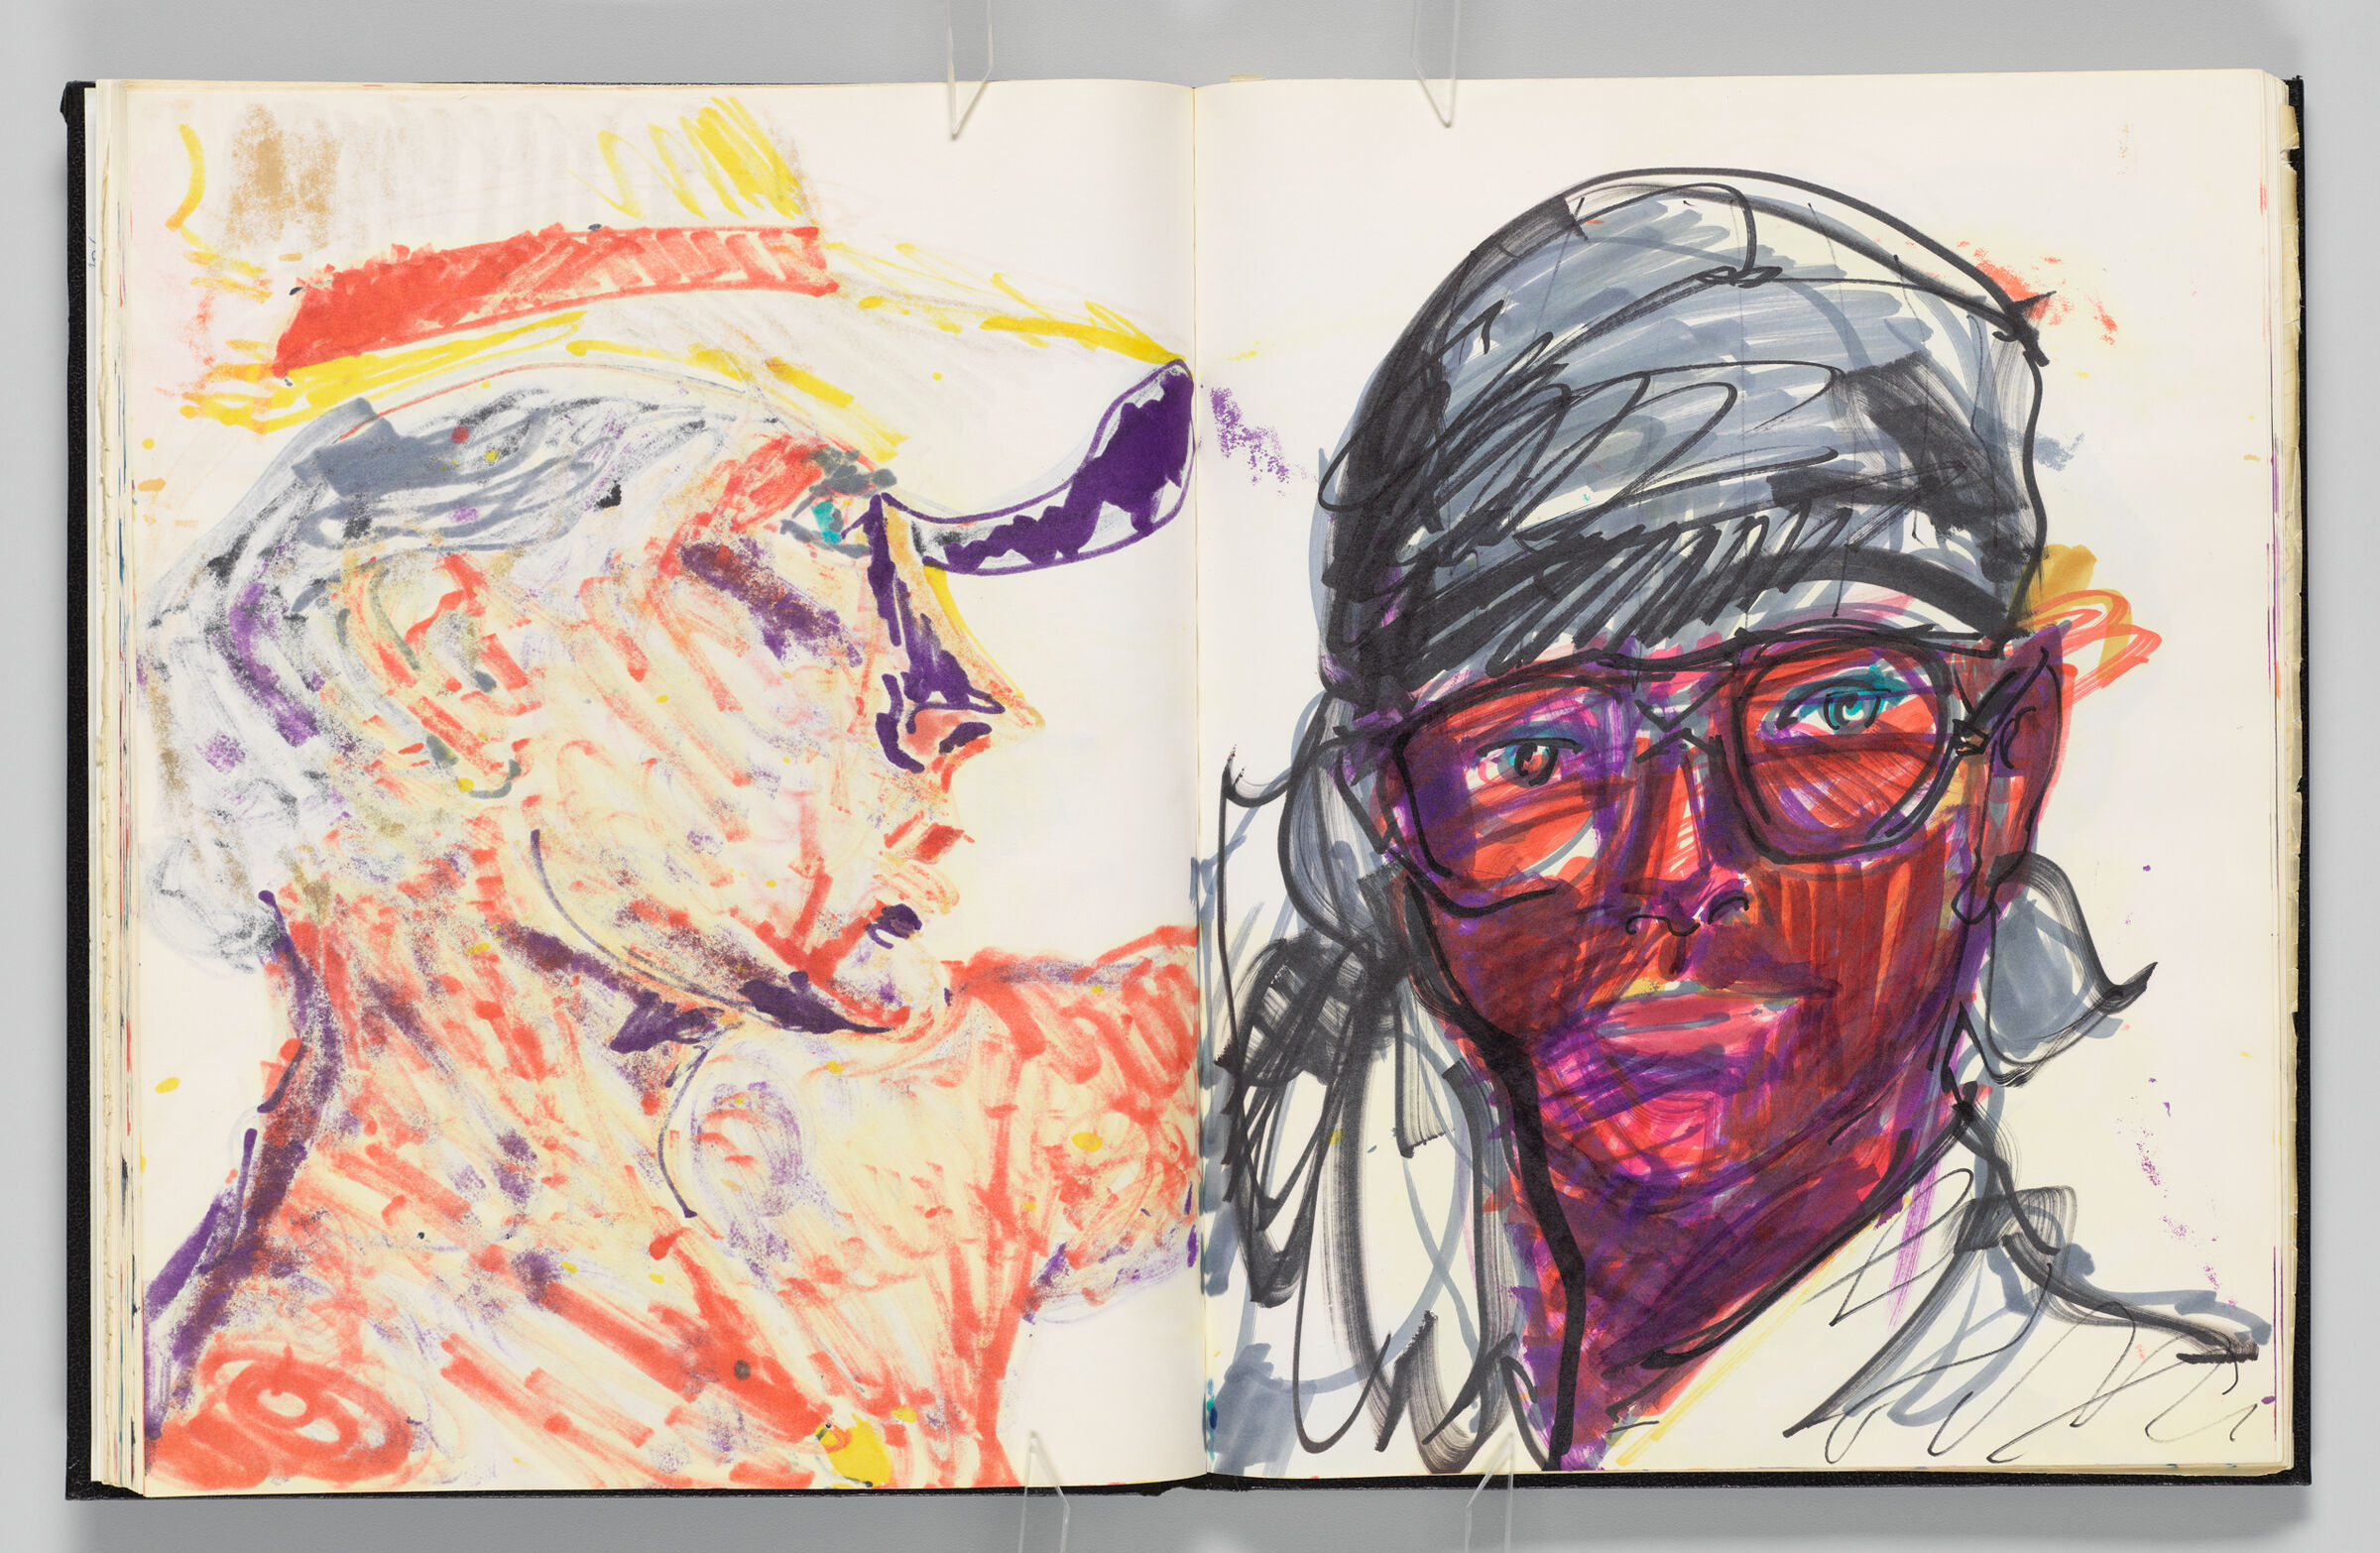 Untitled (Bleed-Through Of Previous Page, Left Page); Untitled (Female Figure In Headscarf And Glasses [Elizabeth], Right Page)